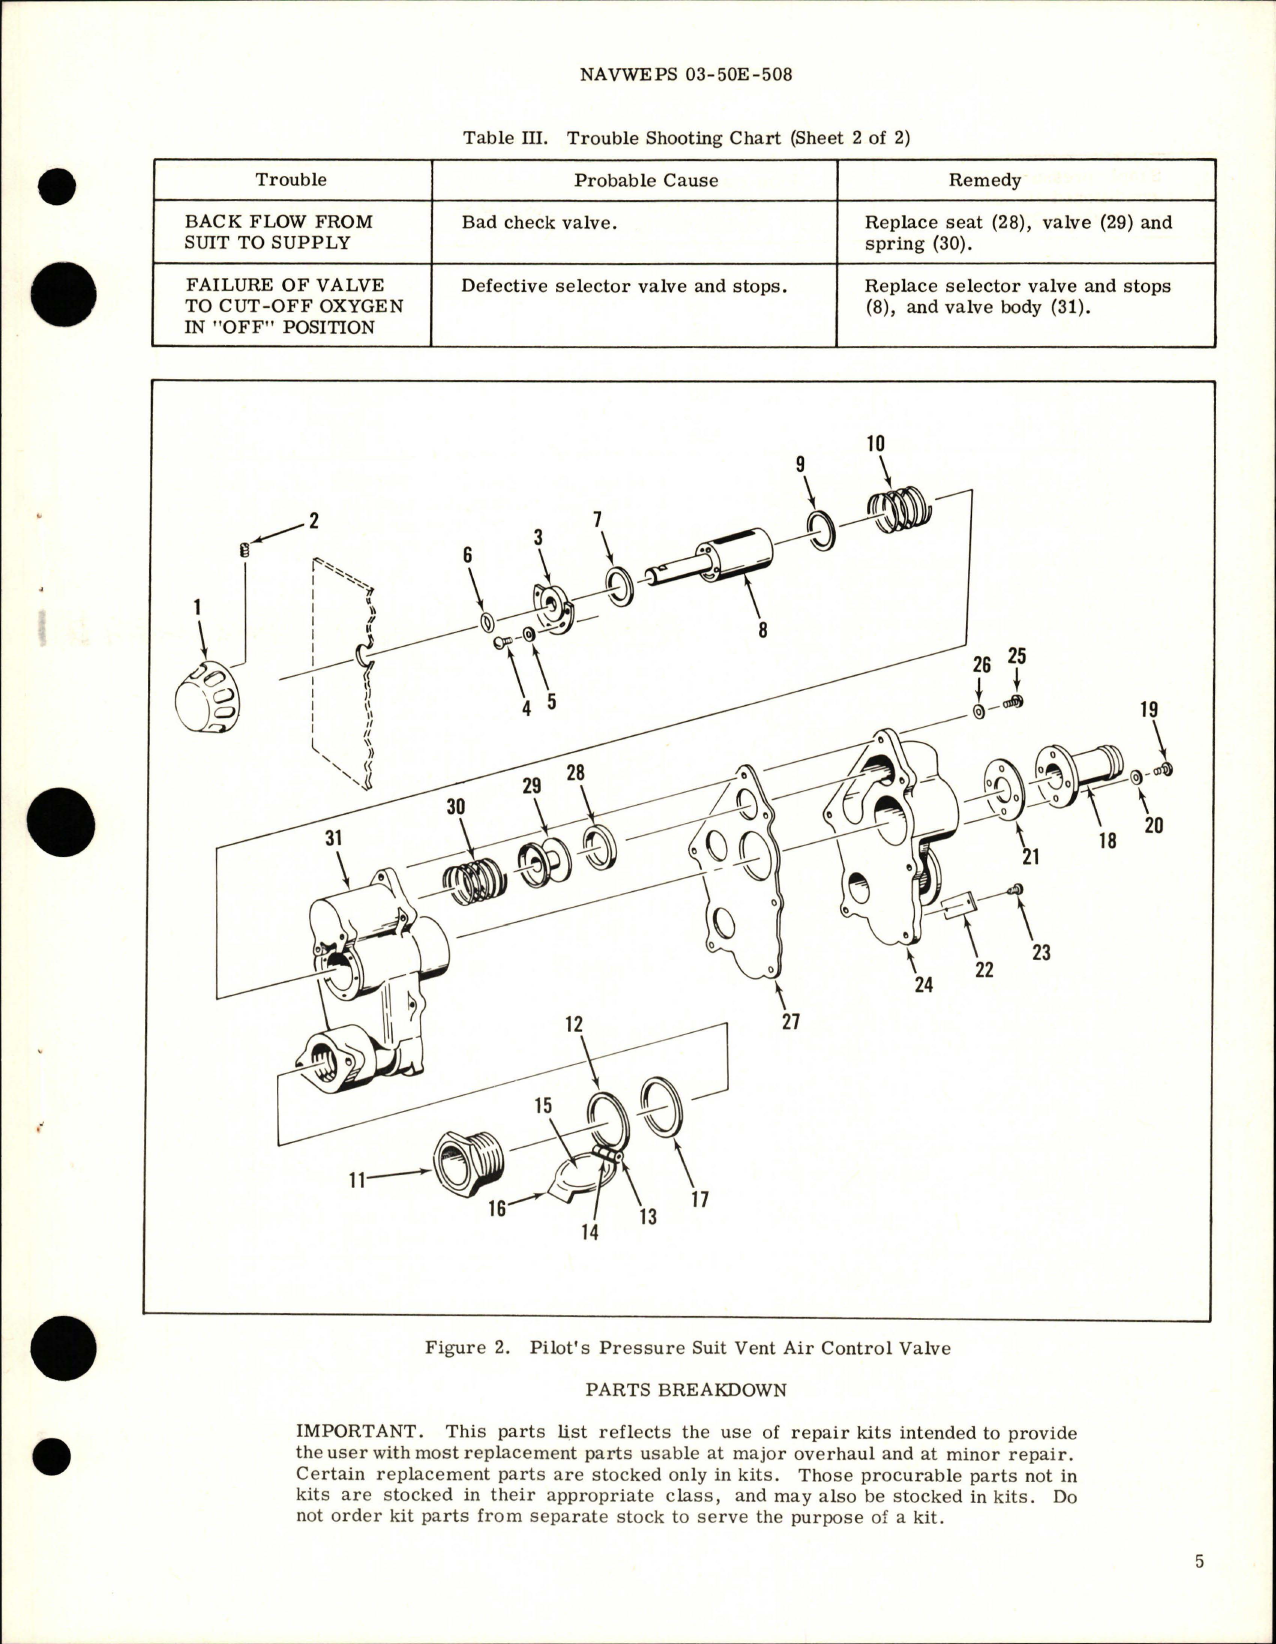 Sample page 5 from AirCorps Library document: Overhaul Instructions with Parts Breakdown for Pilot's Pressure Suit Vent Air Control - Parts F2020 and F2020-3